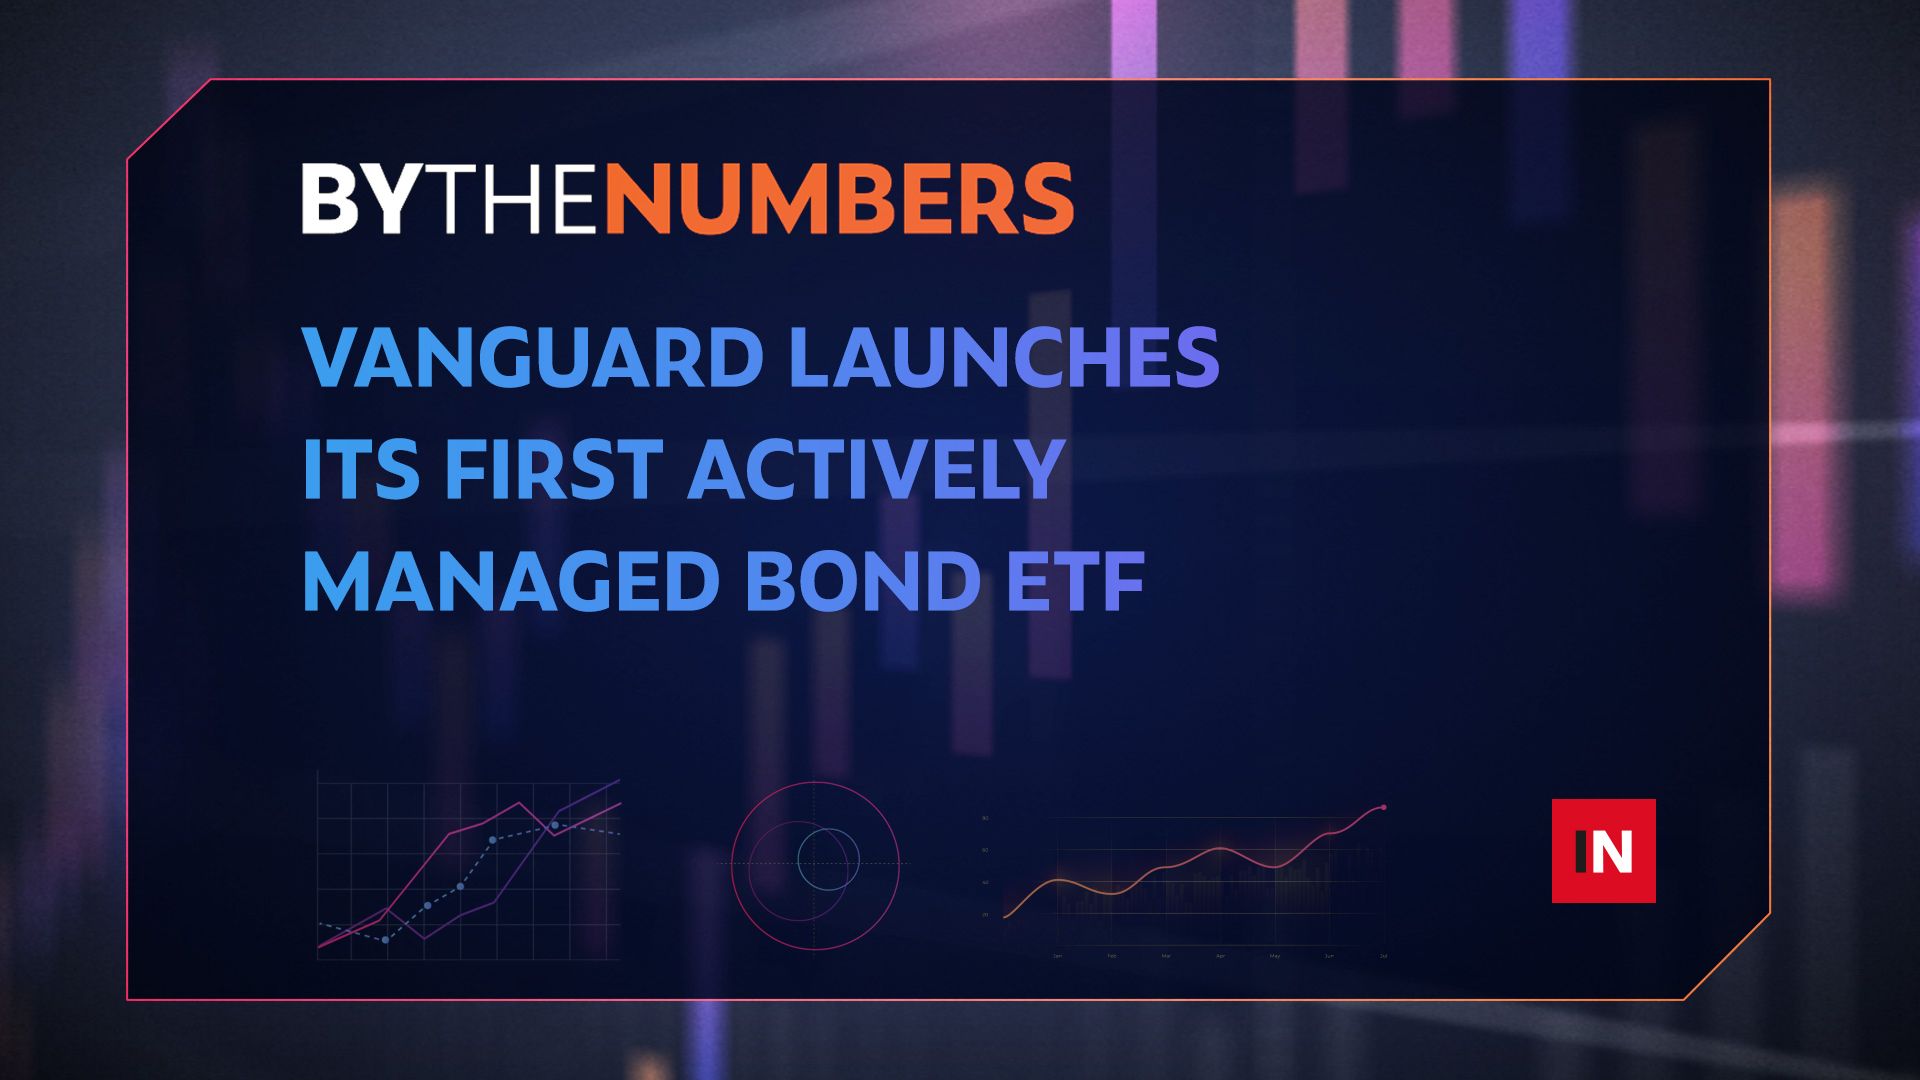 Vanguard launches its first actively managed bond ETF